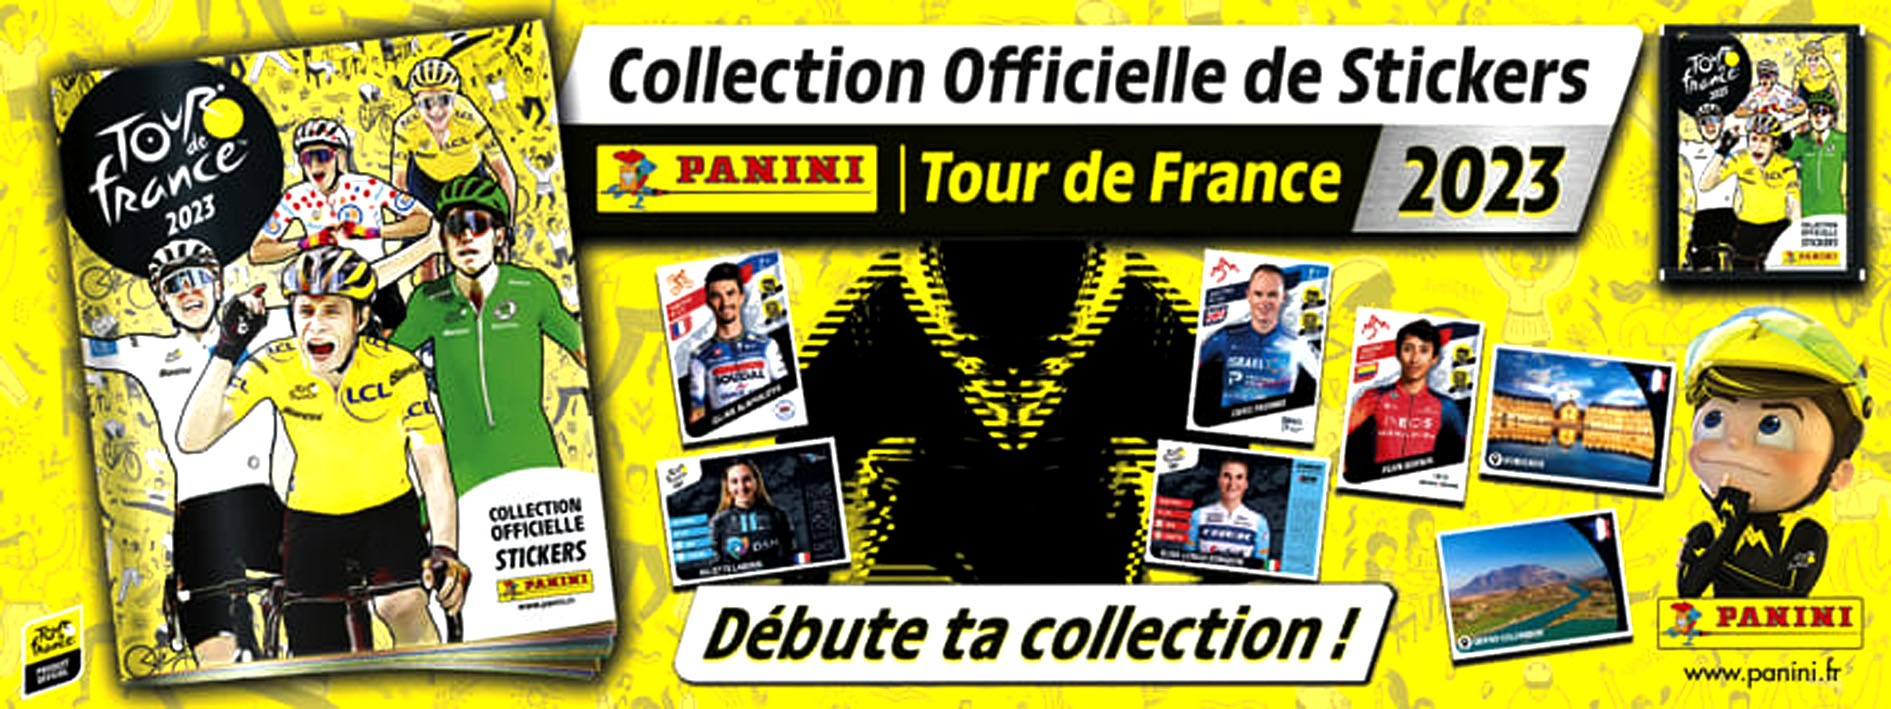 Collection officielle stickers 2023